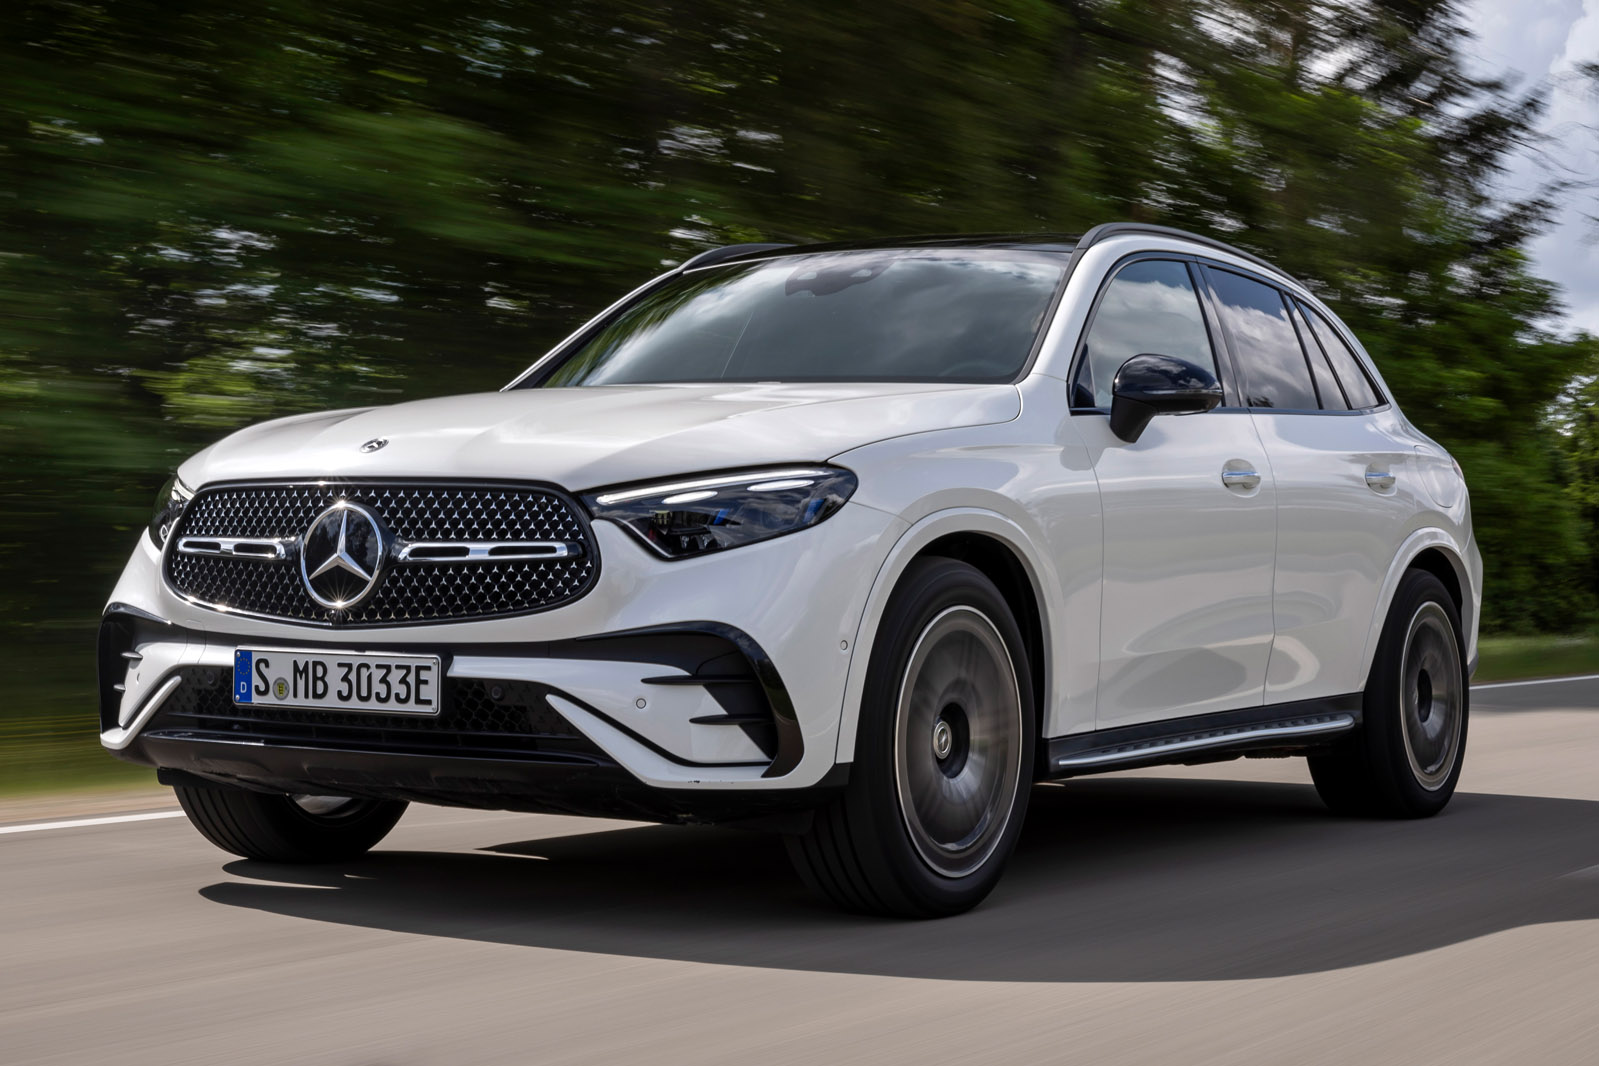 New hybrid-only 2022 Mercedes-Benz GLC priced from £51,855